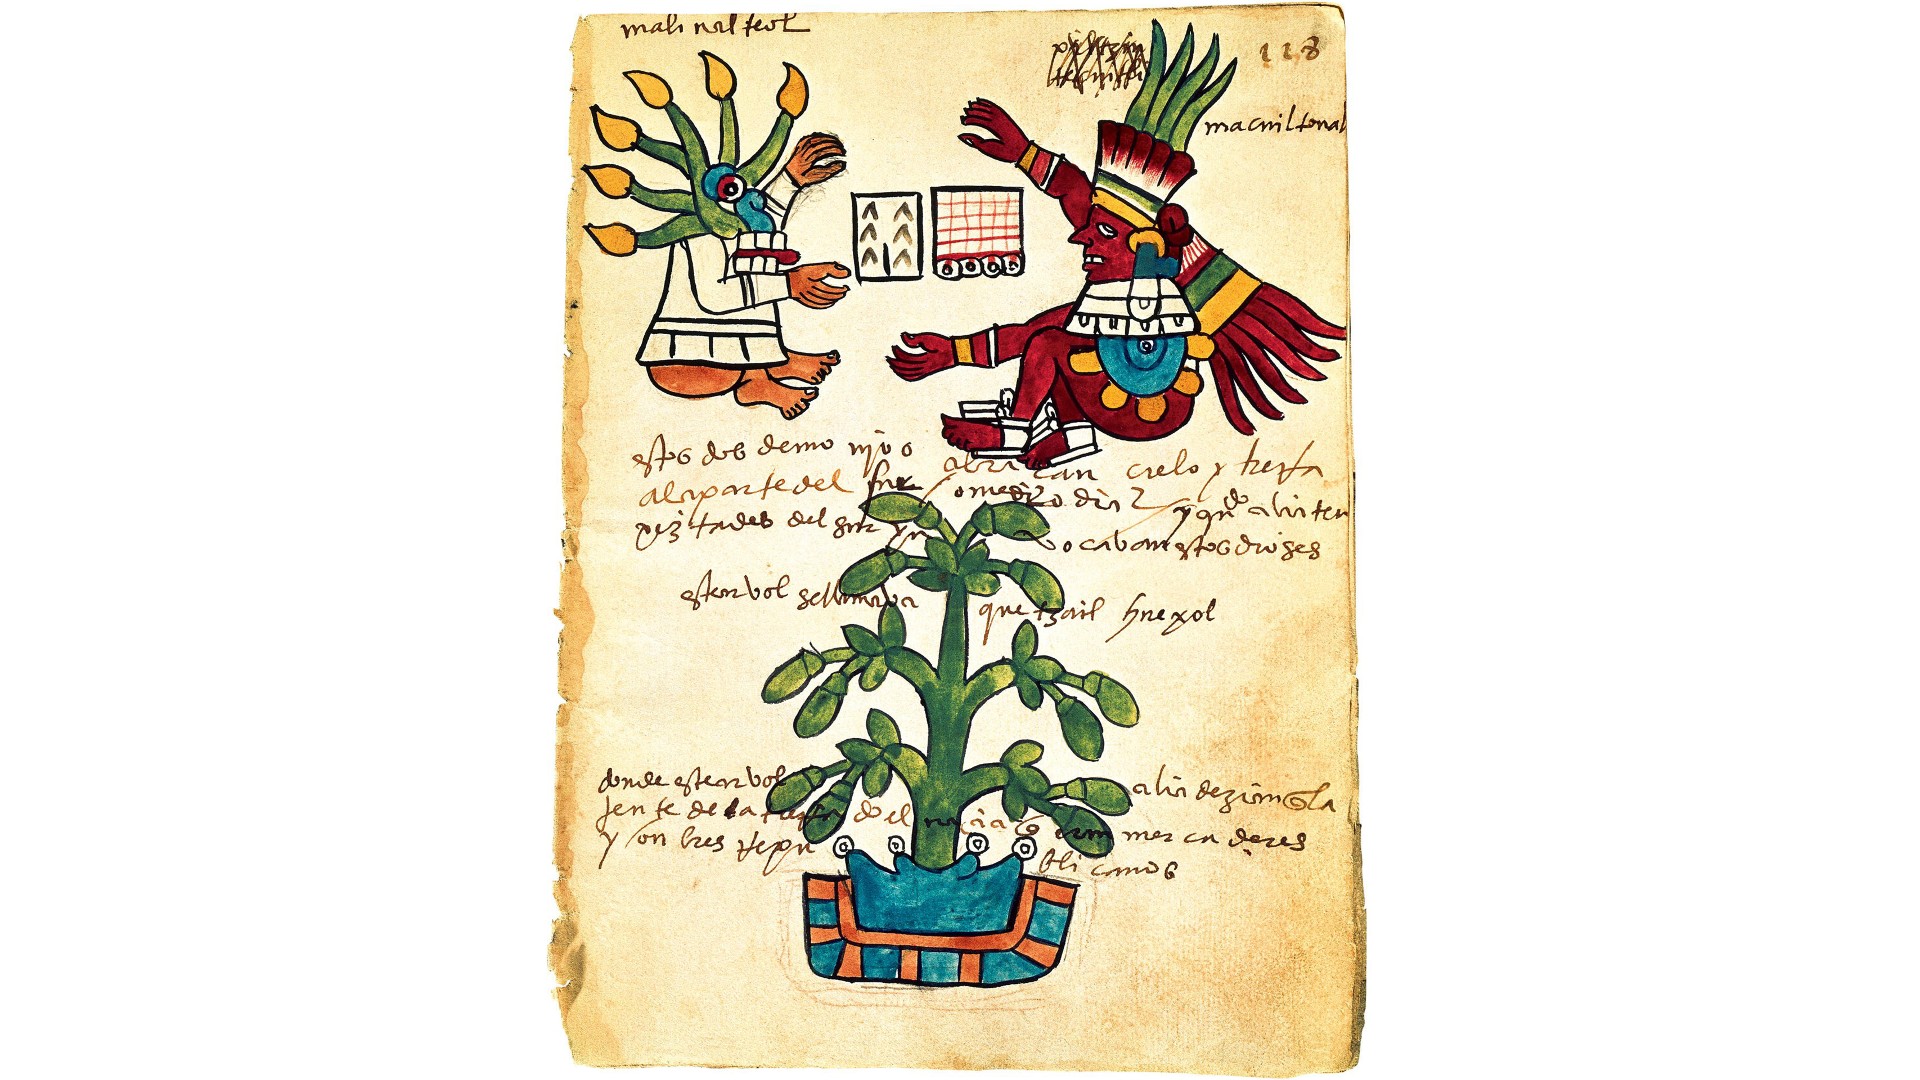 Pre-Columbian art of a cacao tree from the Codex Tudela, 1553.